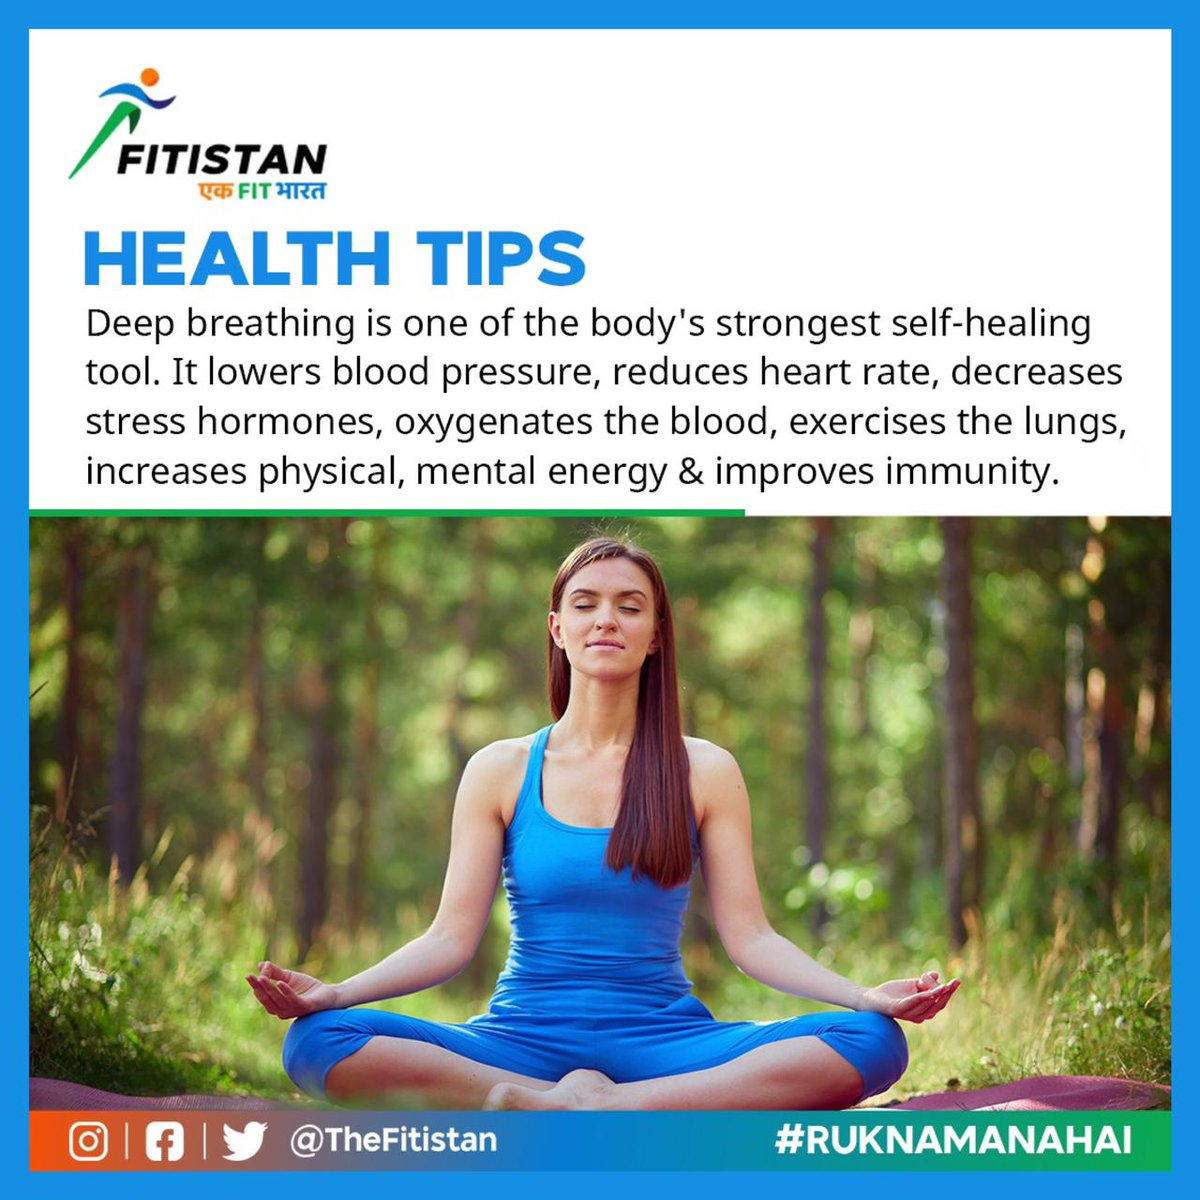 Did you know? #Fitistan #Fitbharat #Healthytips